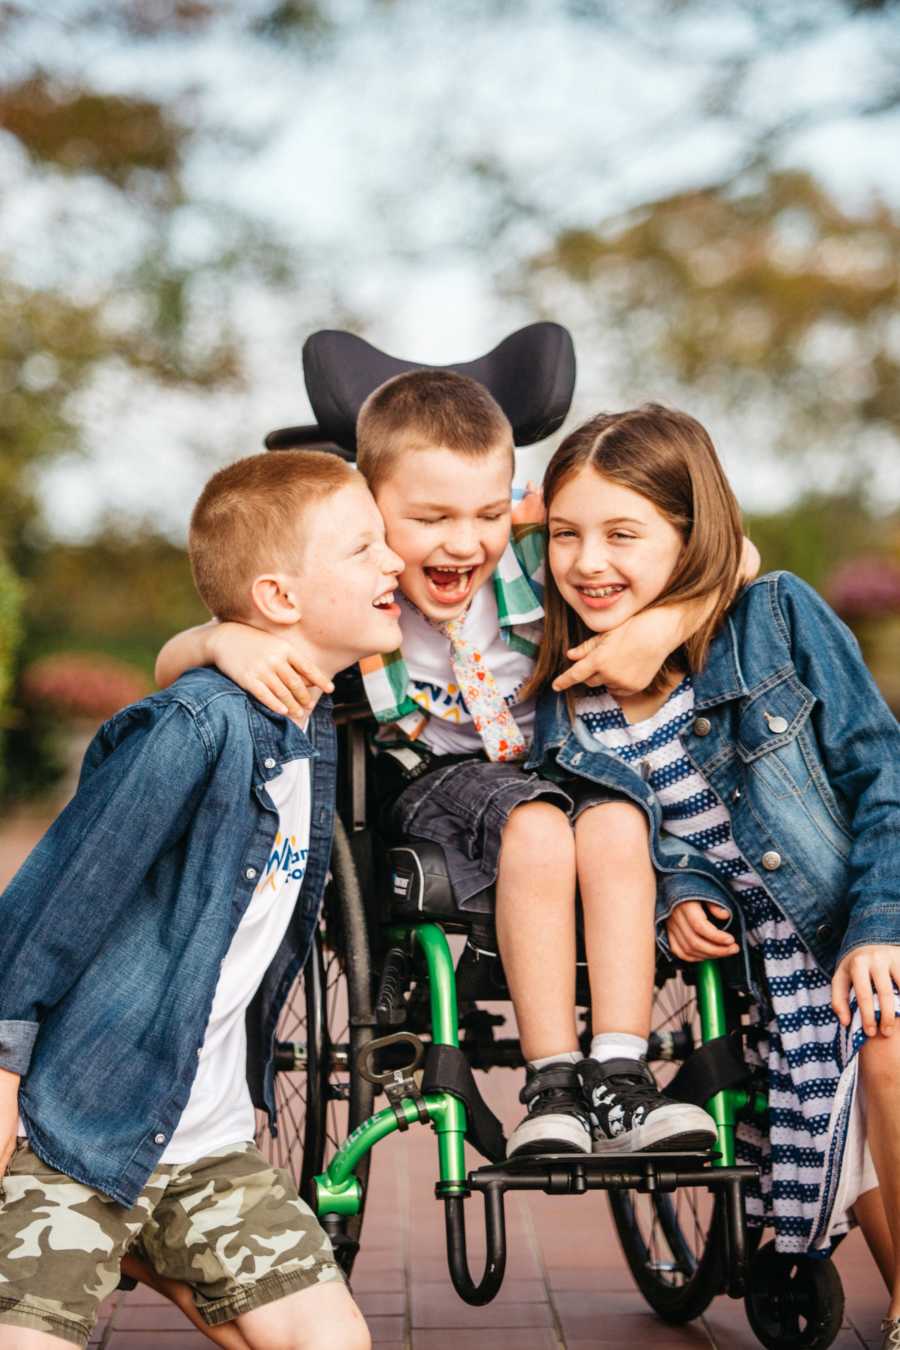 Young boy with vanishing white matter disease sits in wheelchair with arms around brother and sister